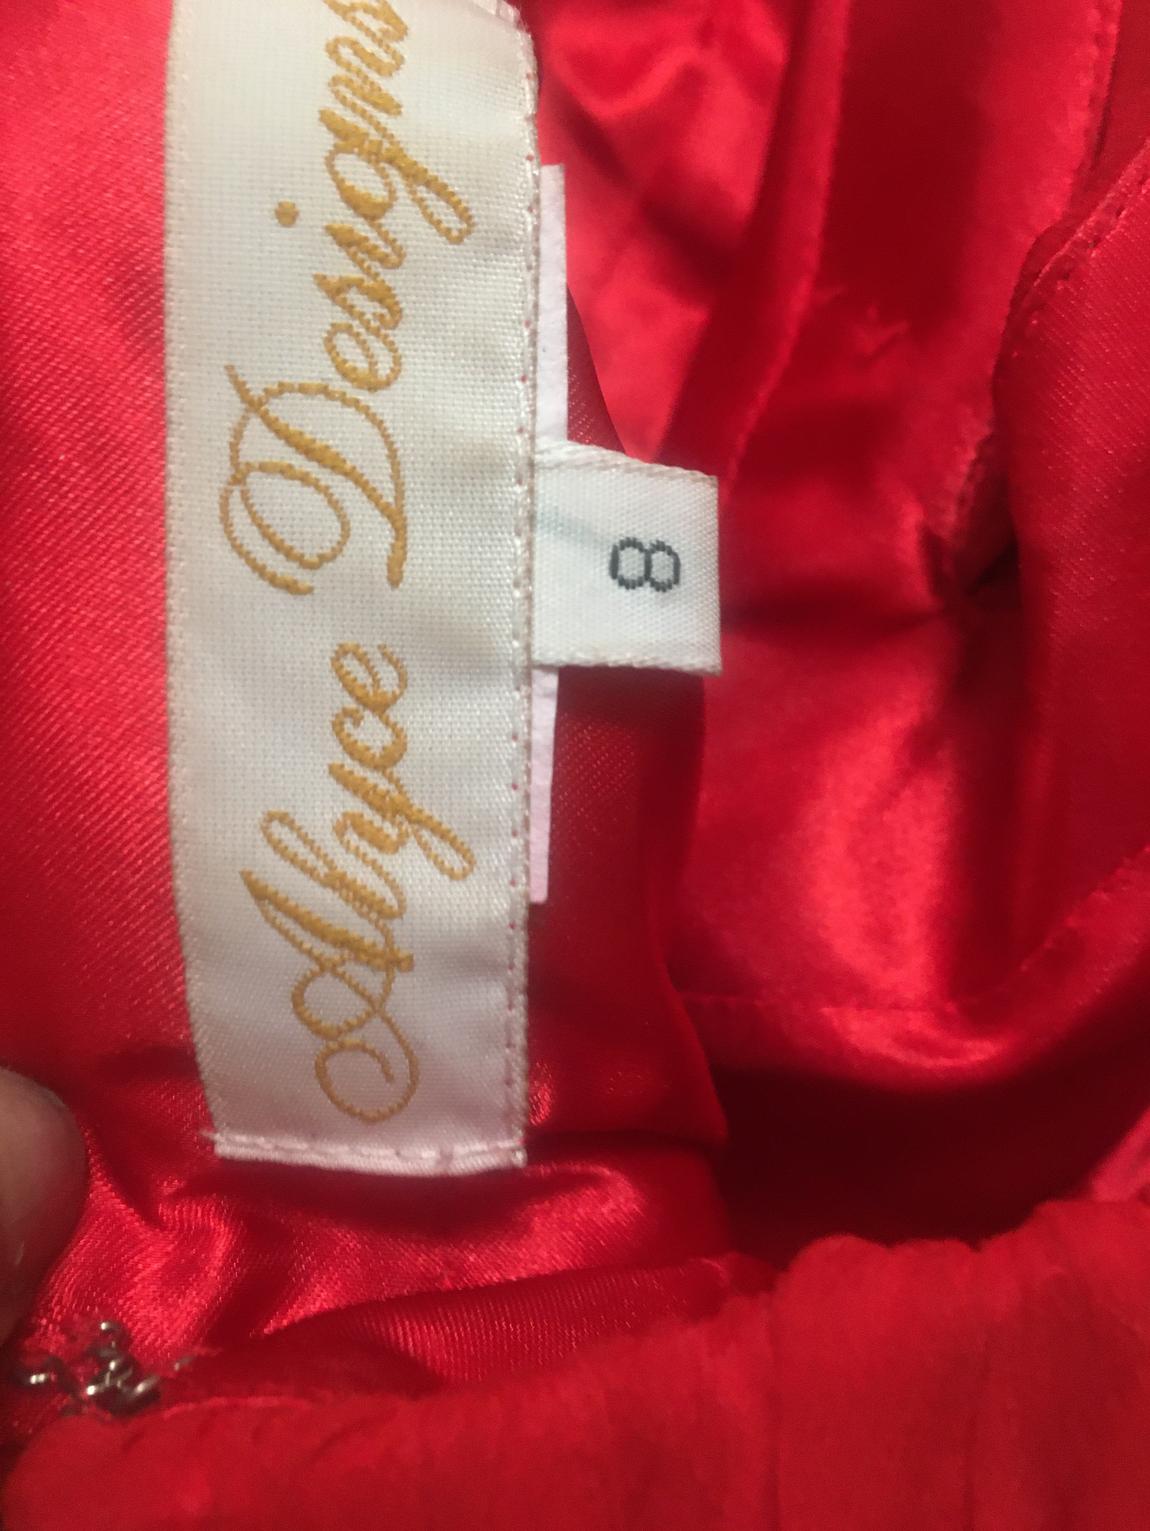 Alyce designs Girls Size 8 Halter Sequined Red Cocktail Dress on Queenly